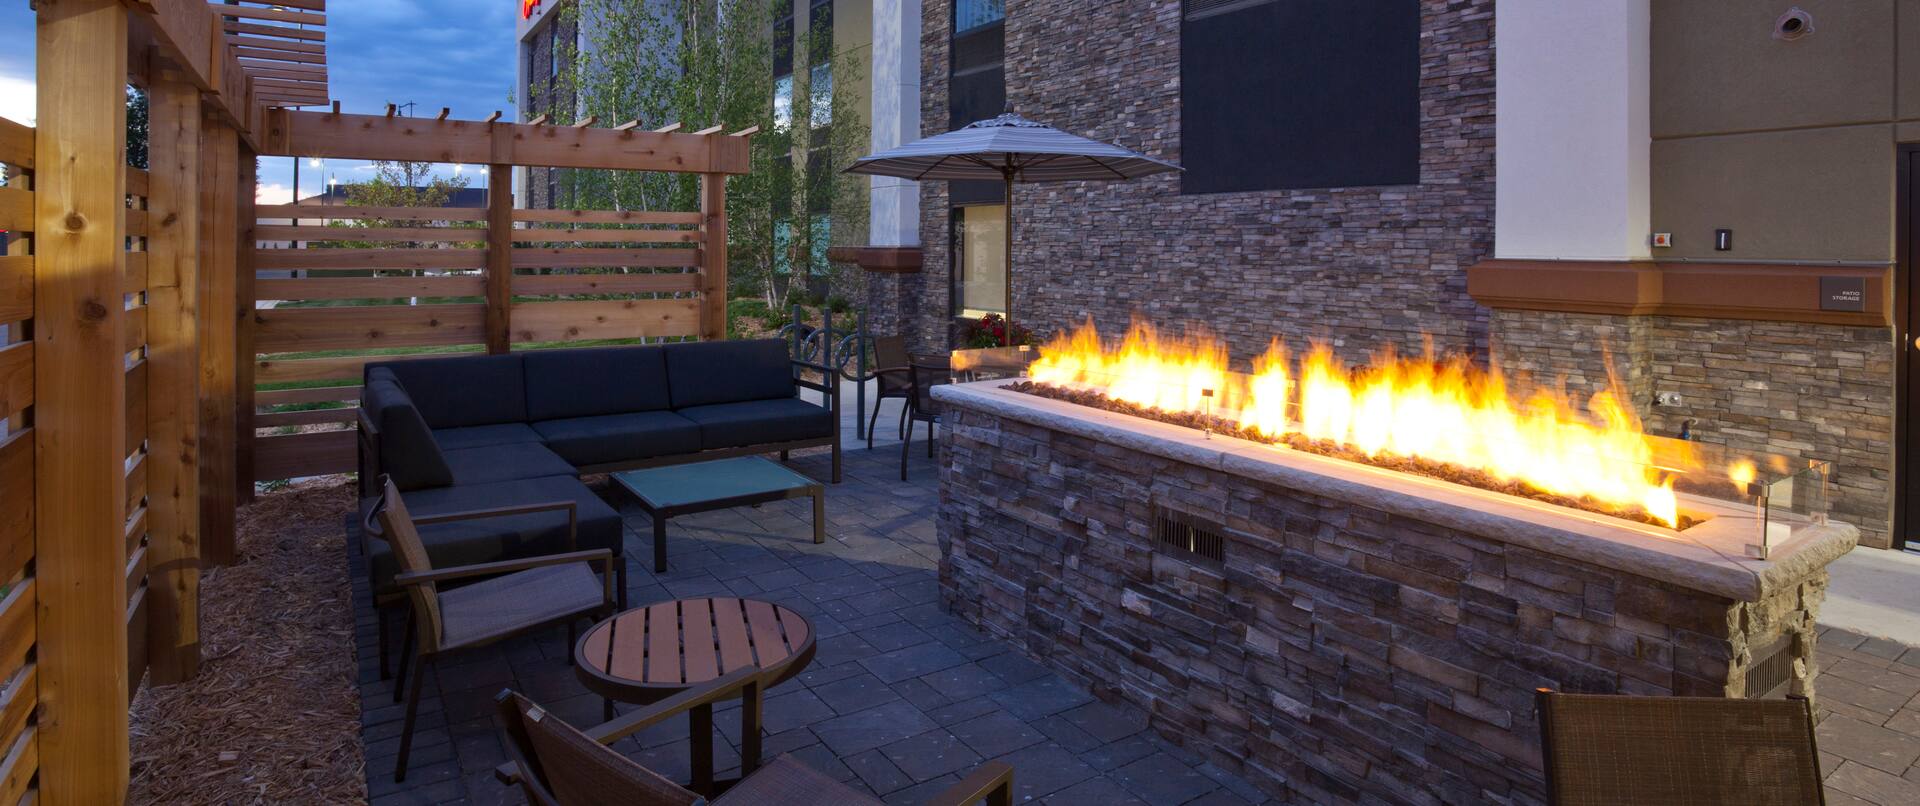 Outdoor Patio and Fire Pit  